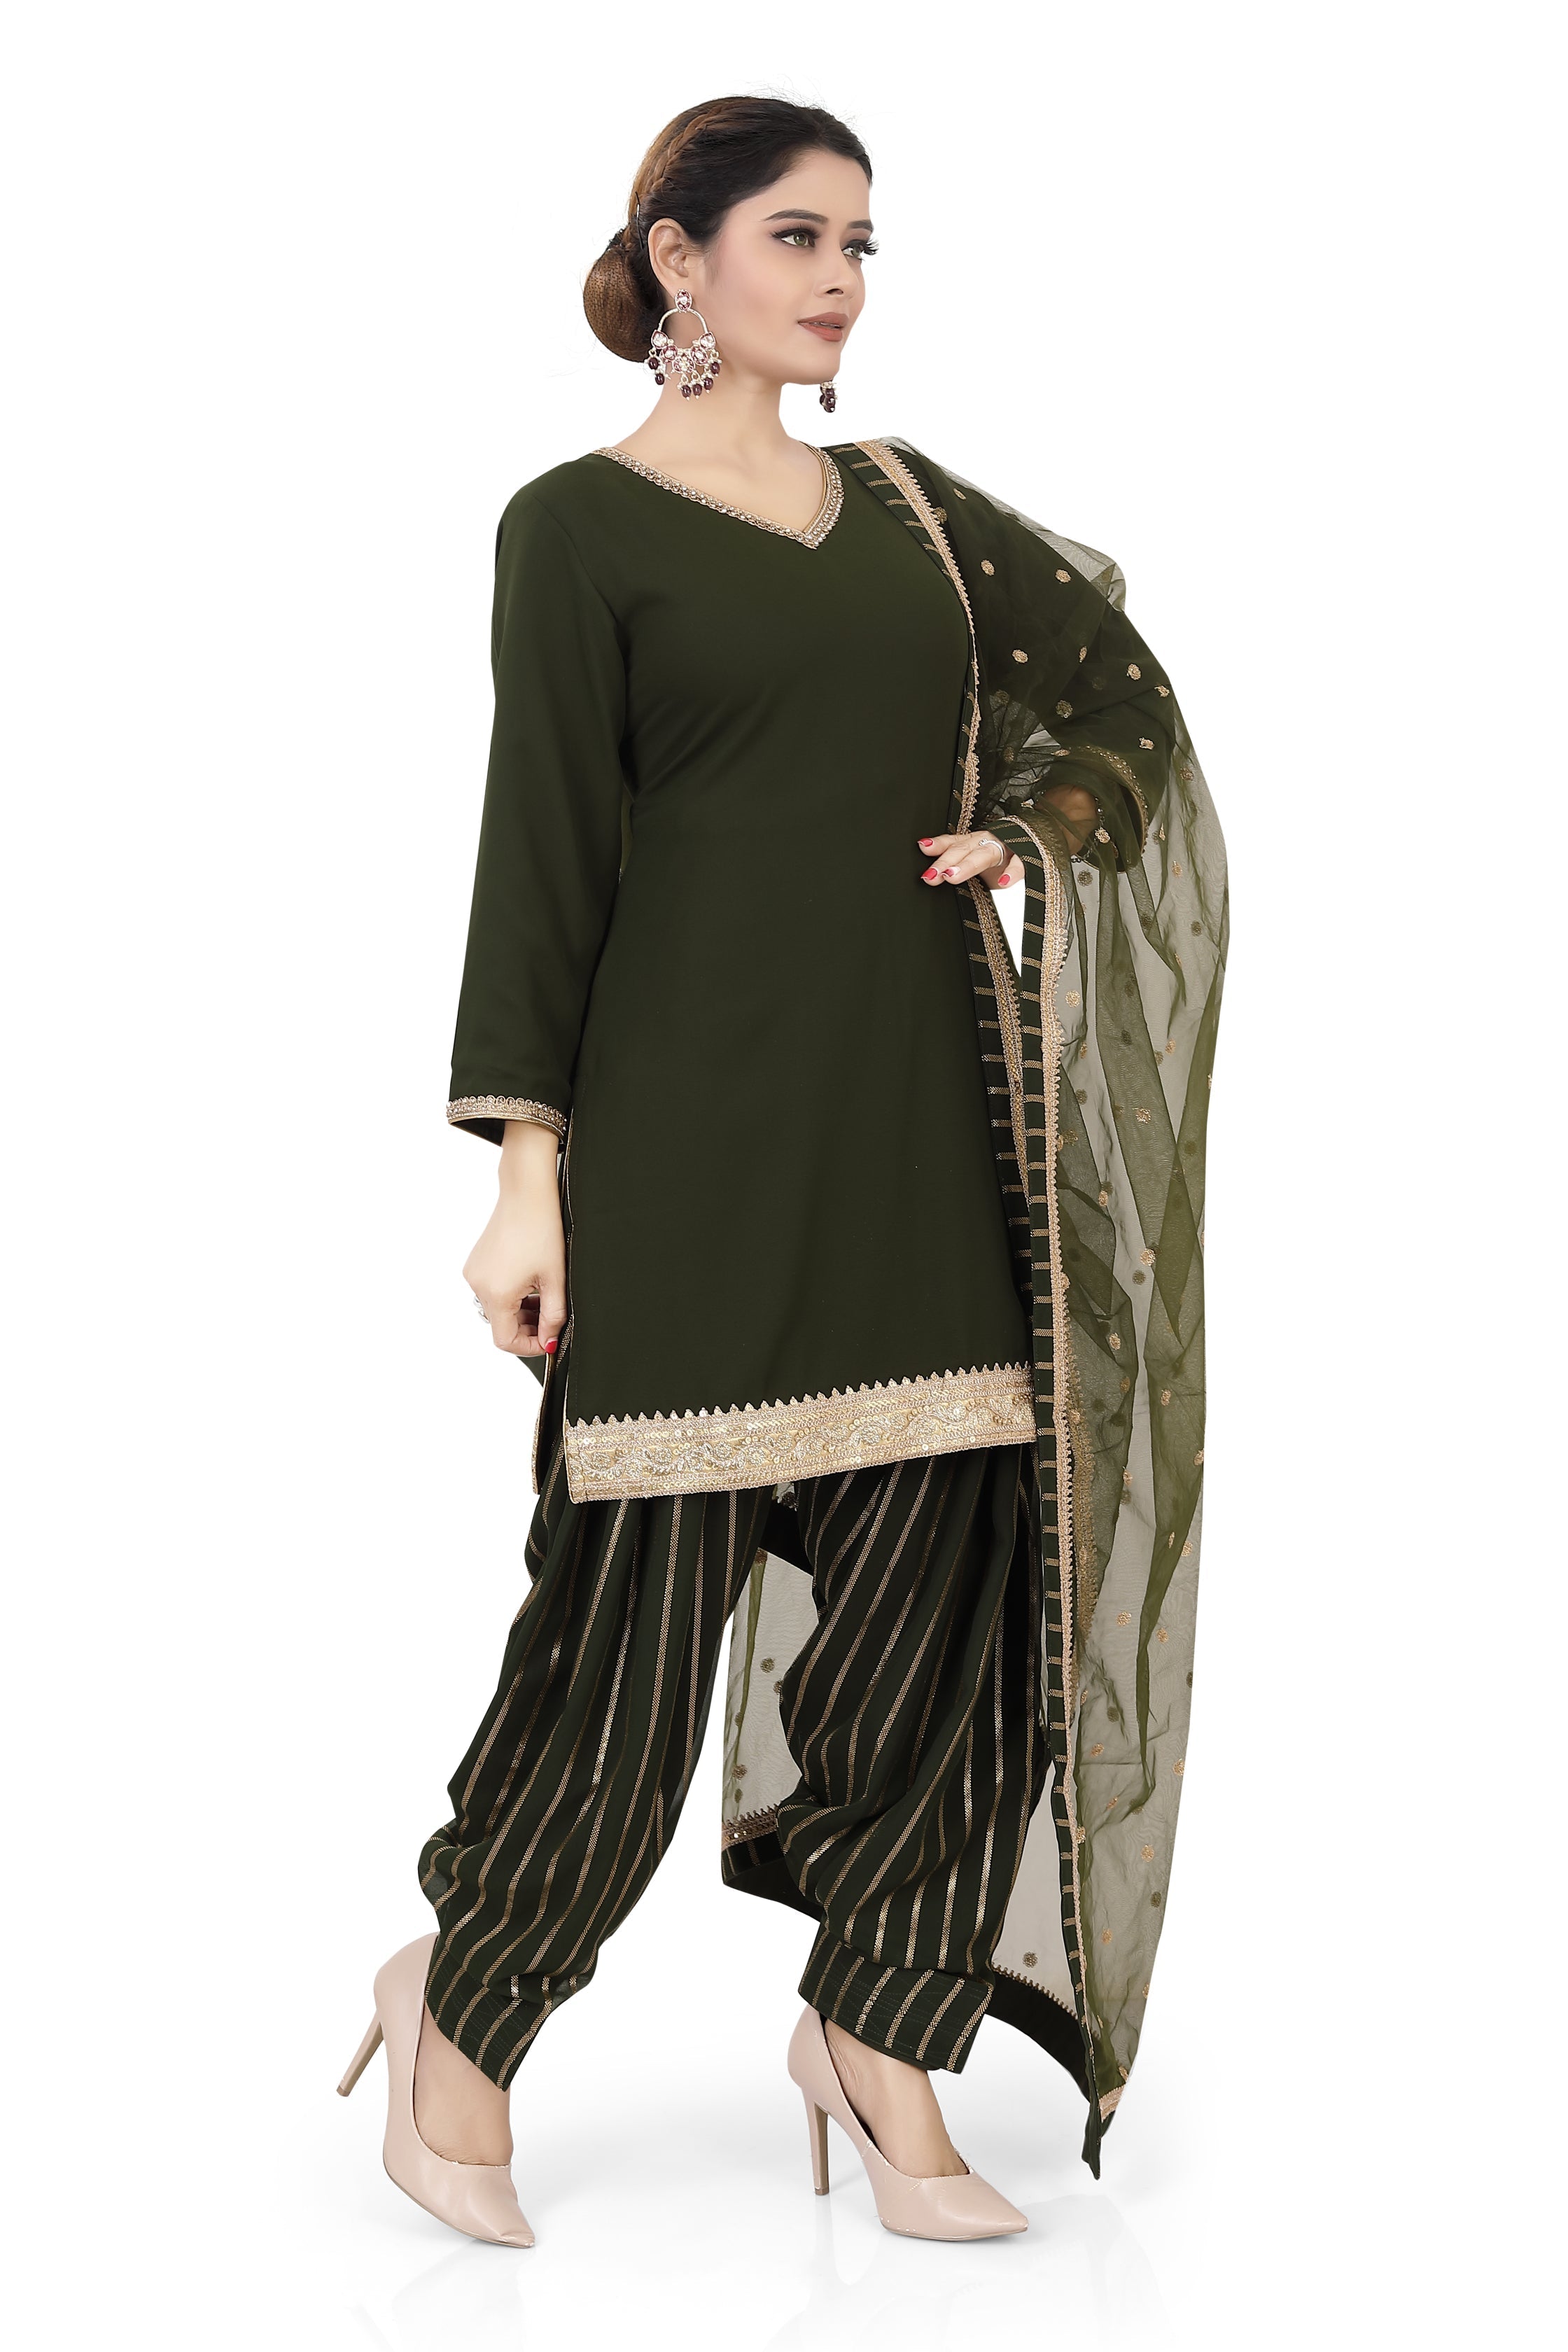 Olive Green Colour Top Dhoti Suit - Premium Festive Wear from Dulhan Exclusives - Just $149! Shop now at Dulhan Exclusives